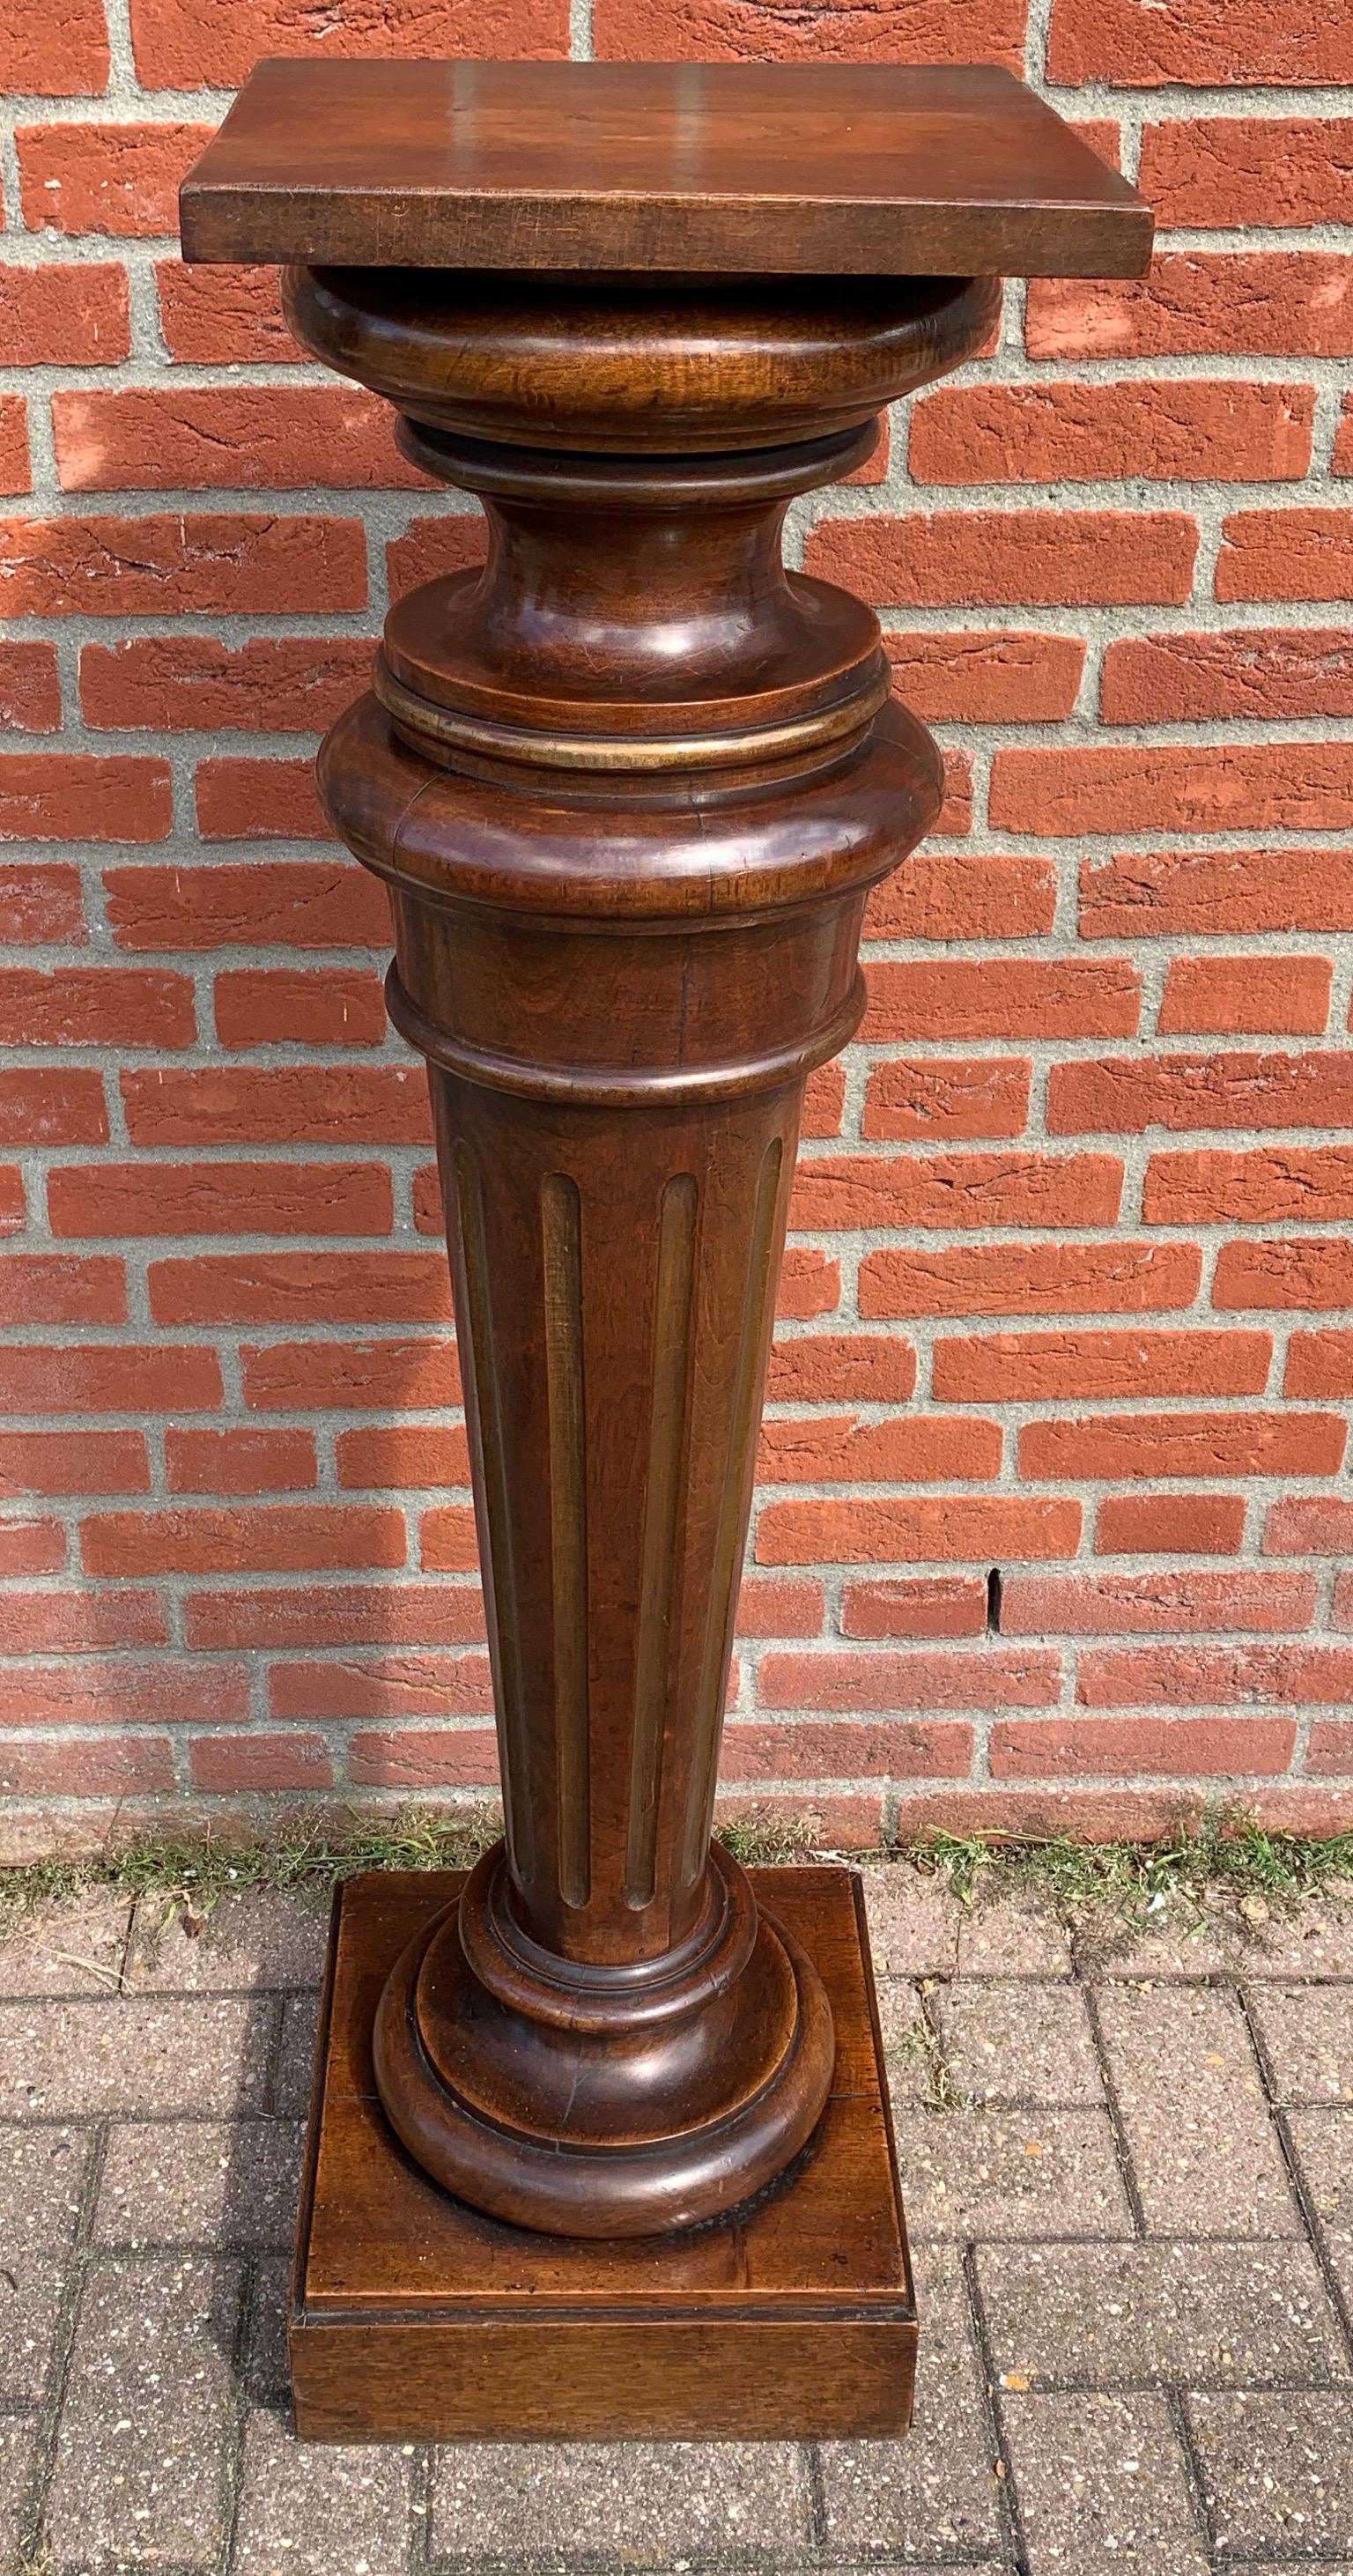 Stunning classical style display column with a wonderful and warm patina.

This marvelous piece of late 19th century workmanship is another fine example of the quality that was made in those days. All handcrafted out of walnut and beautifully